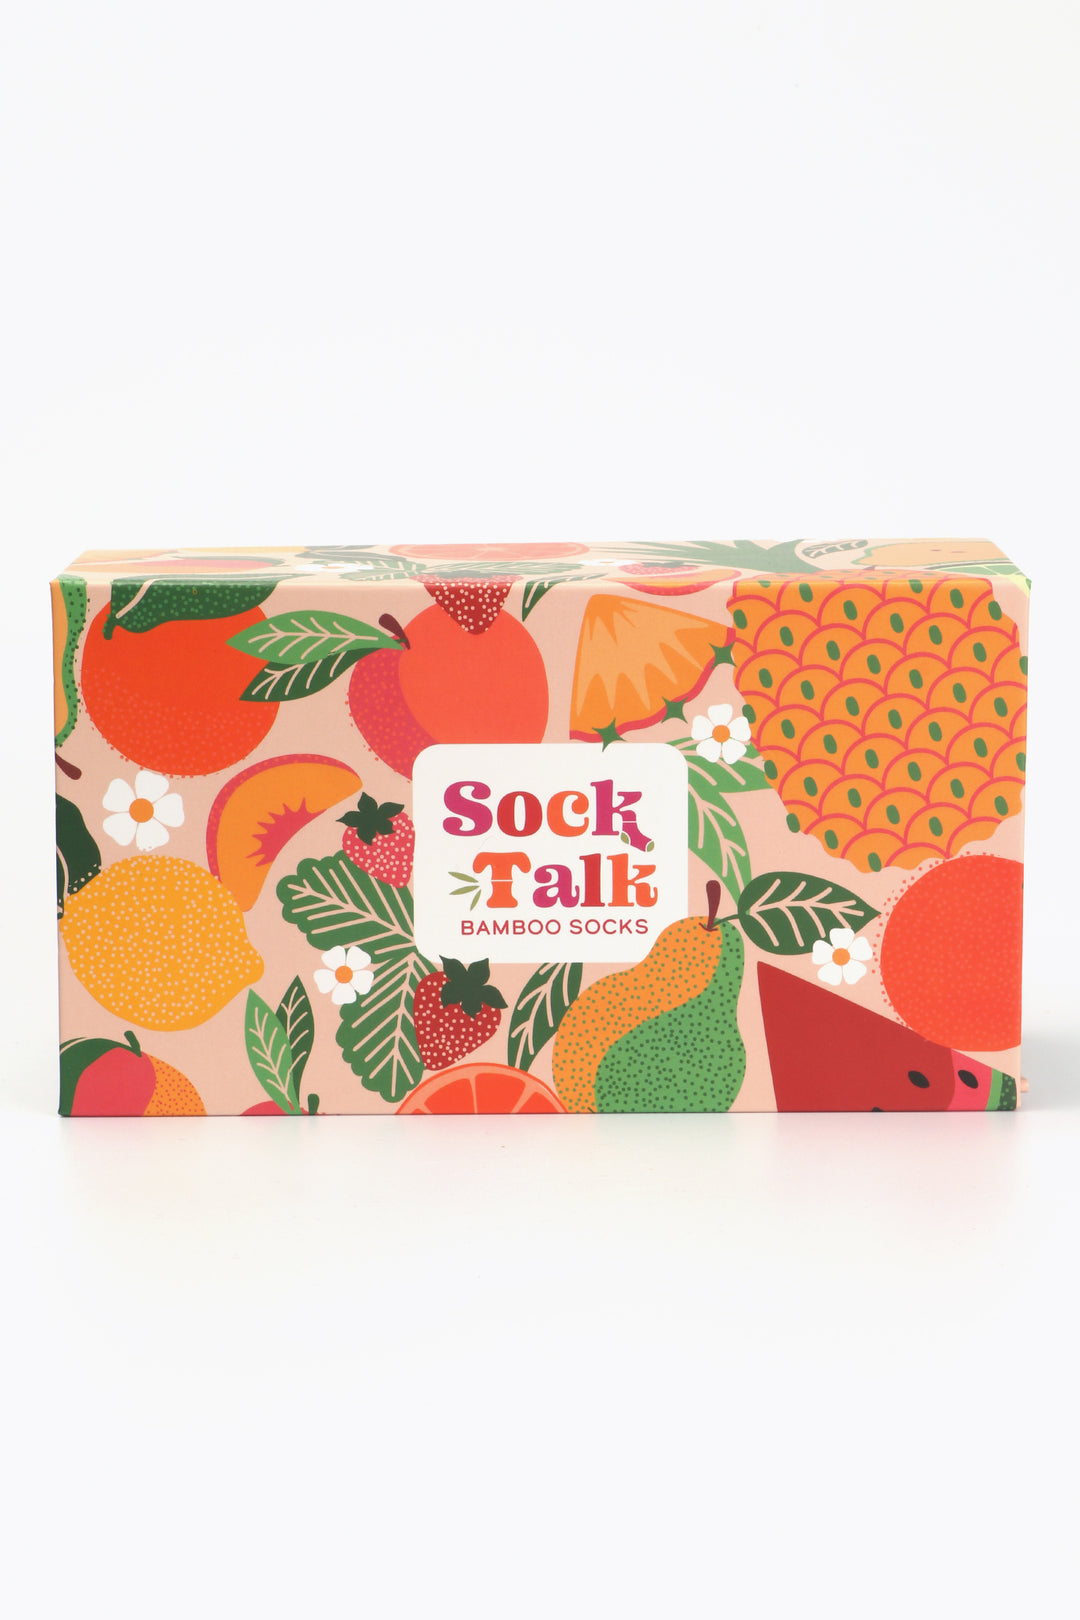 sock talk gift box with an all over fruit pattern featuring, pineapples, pears, lemons, peaches, strawberries and oranges